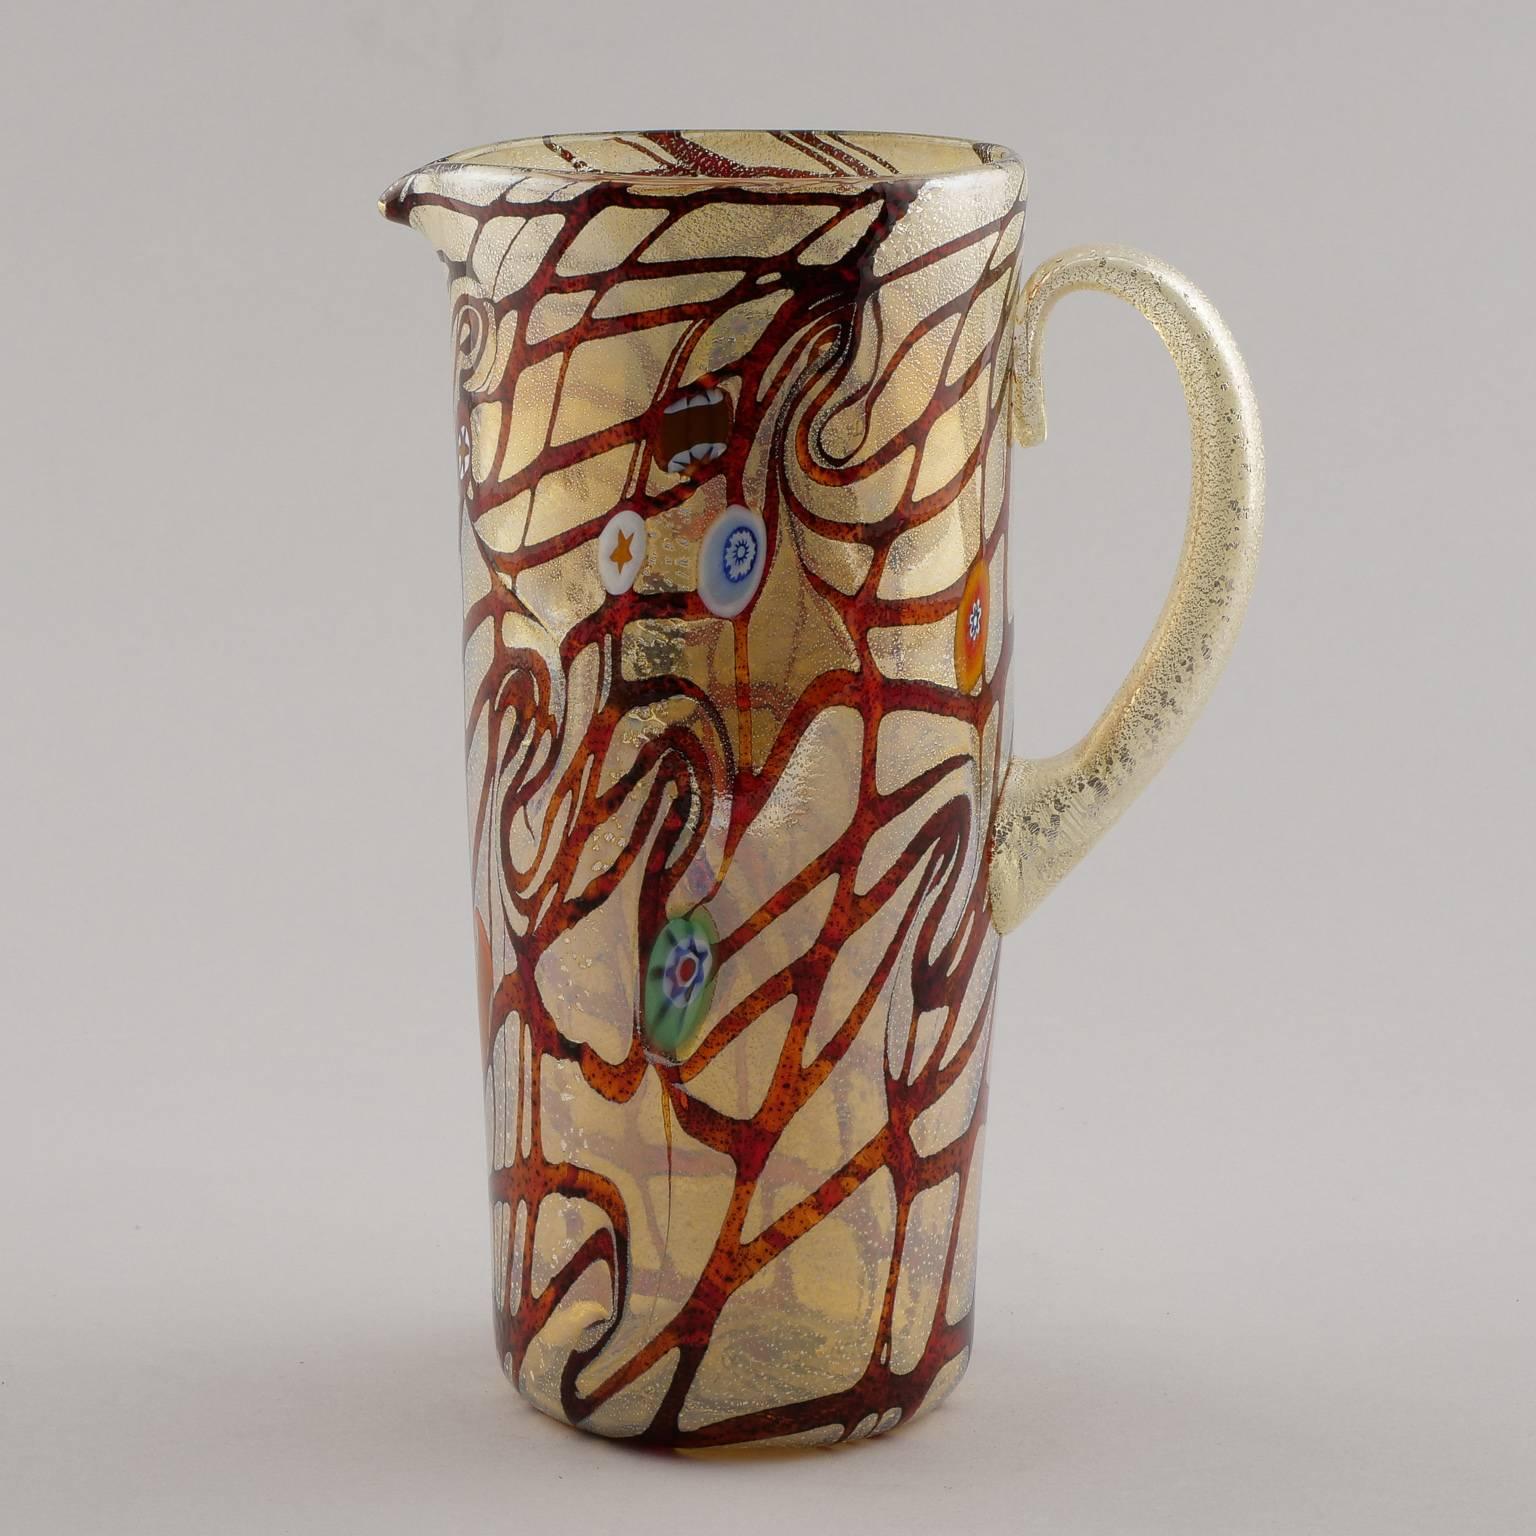 Set of contemporary Murano glass pitcher with six coordinating tumblers. Colors of set are burnt orange, red, gold with streaks of iridescent silvery white and blue and green floral accents. Measurements shown are for the pitcher. Glasses are 4.5